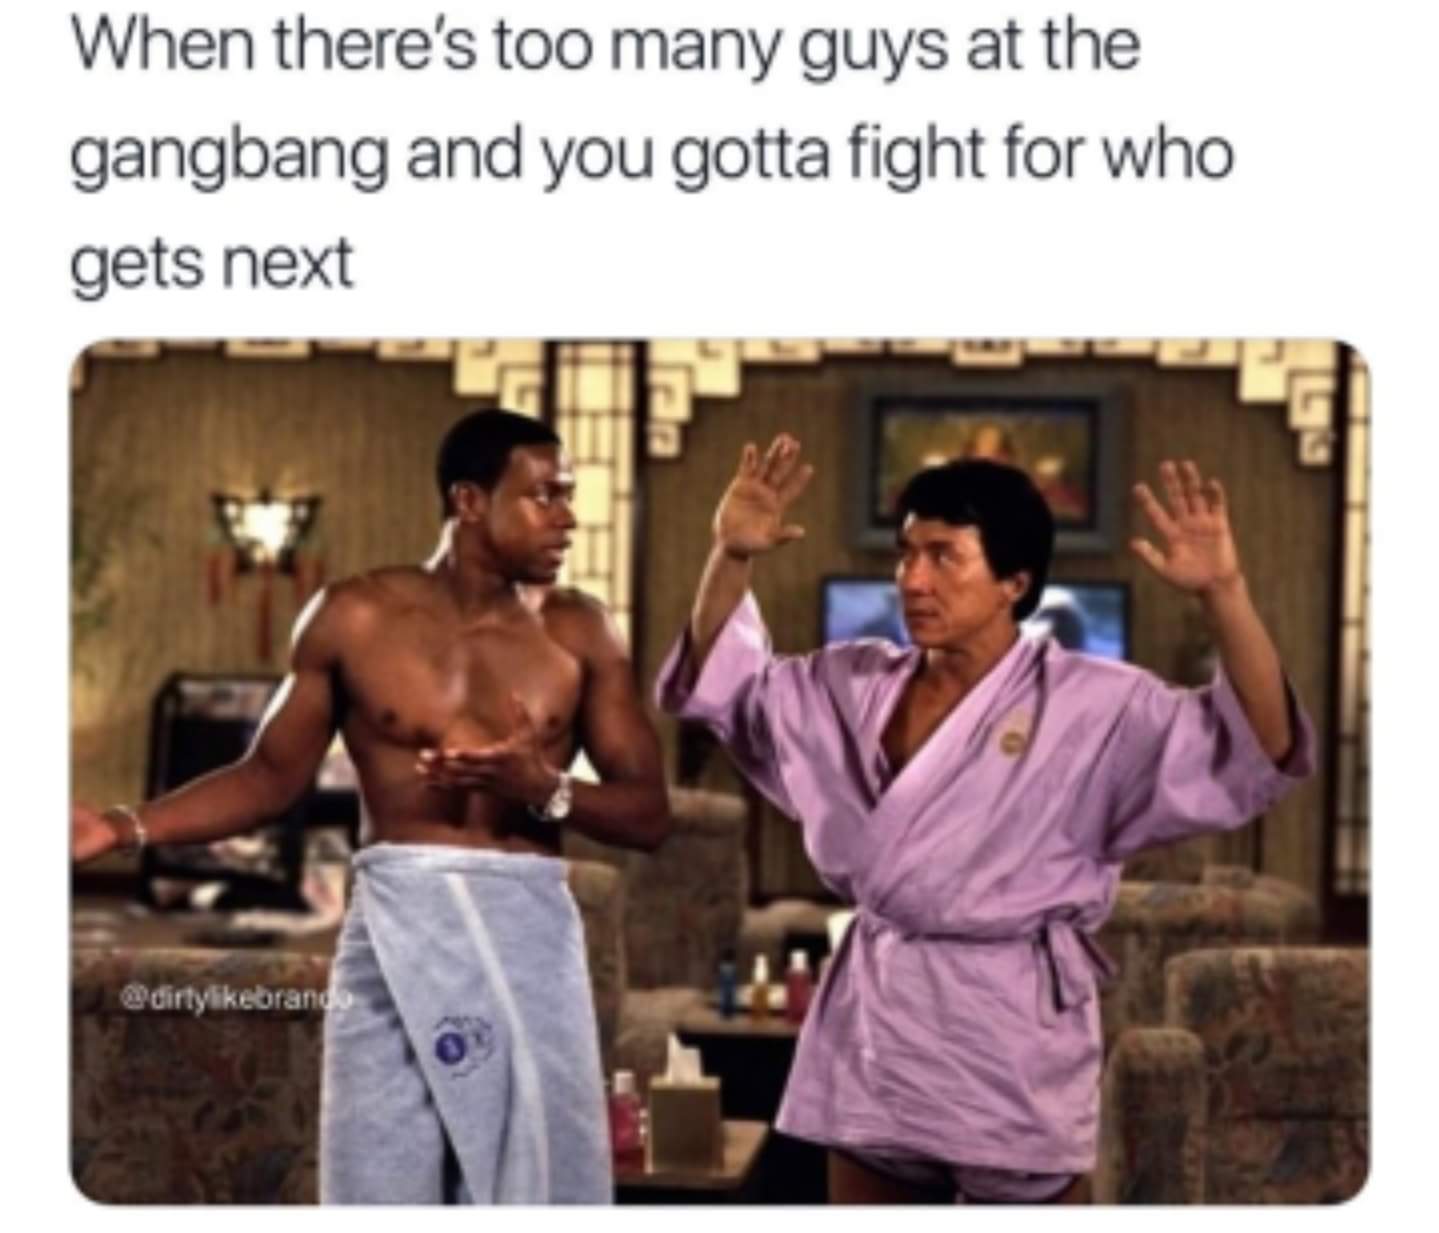 nsfw memes - best rush hour - When there's too many guys at the gangbang and you gotta fight for who gets next